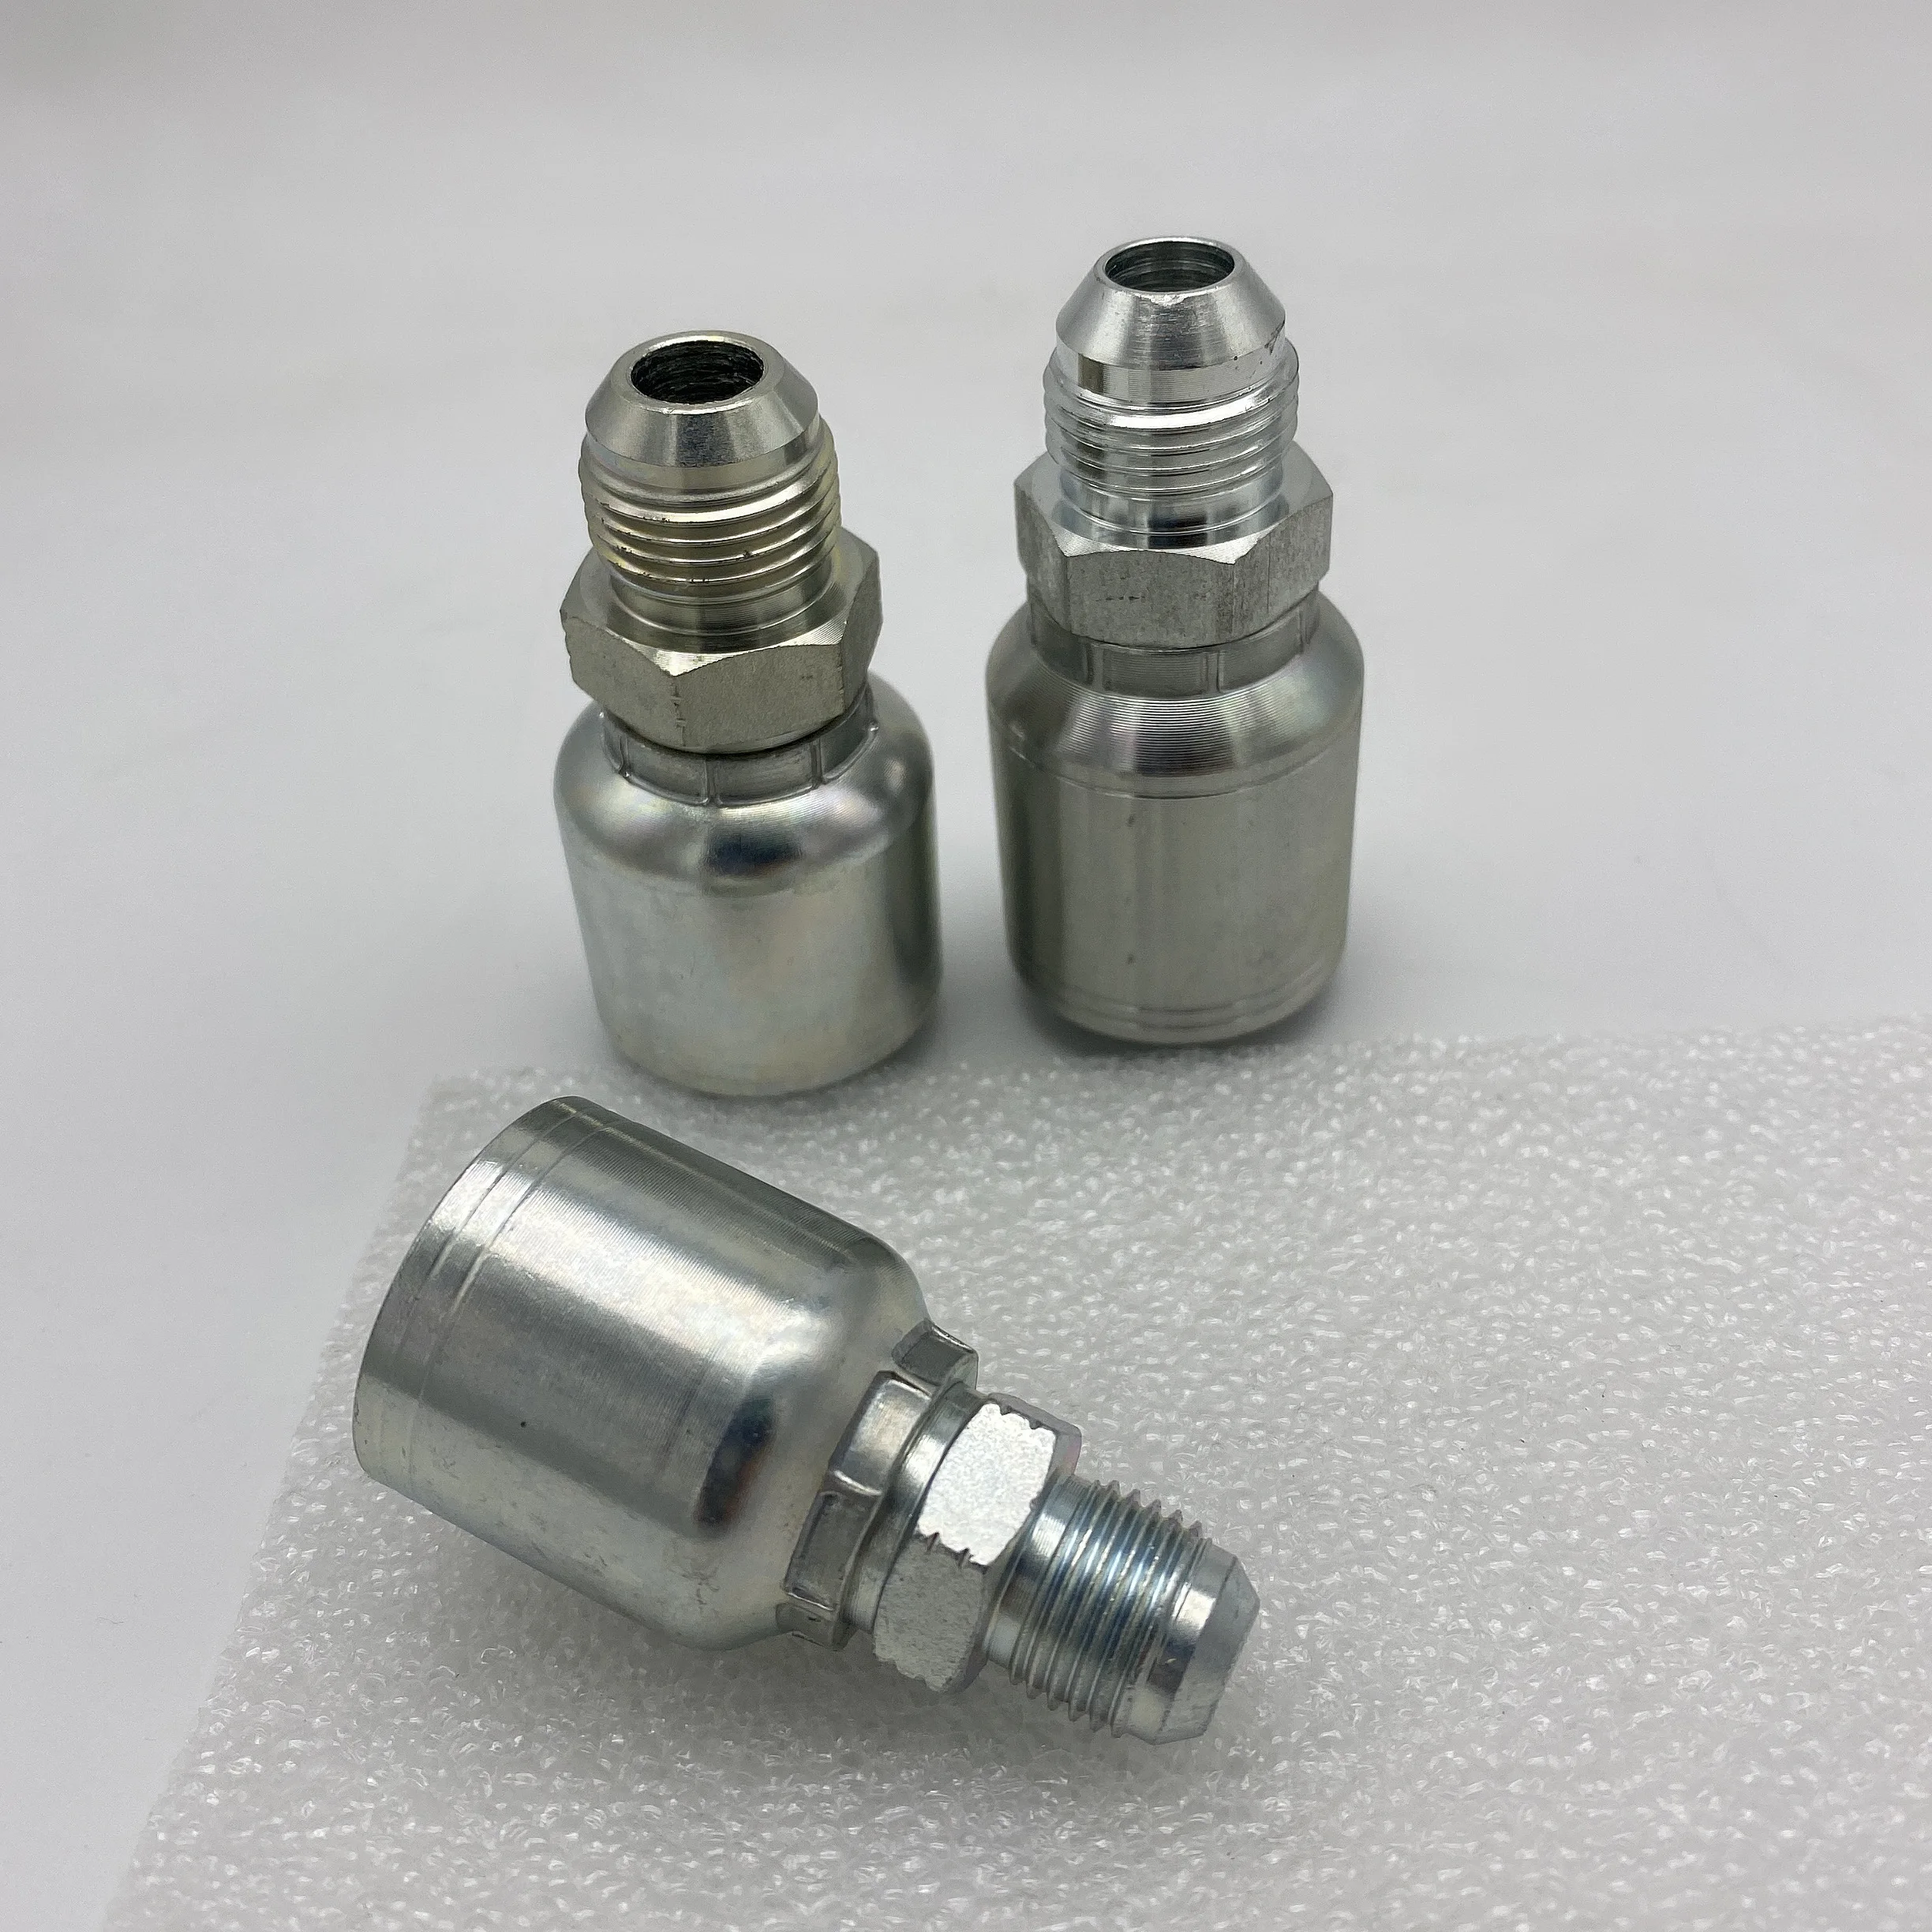 

16711-04-04PK JIC 74 Degree Cone Carbon Steel Hydraulic Union One Piece Hose Fitting Reusable Hydraulic Hose Fittings